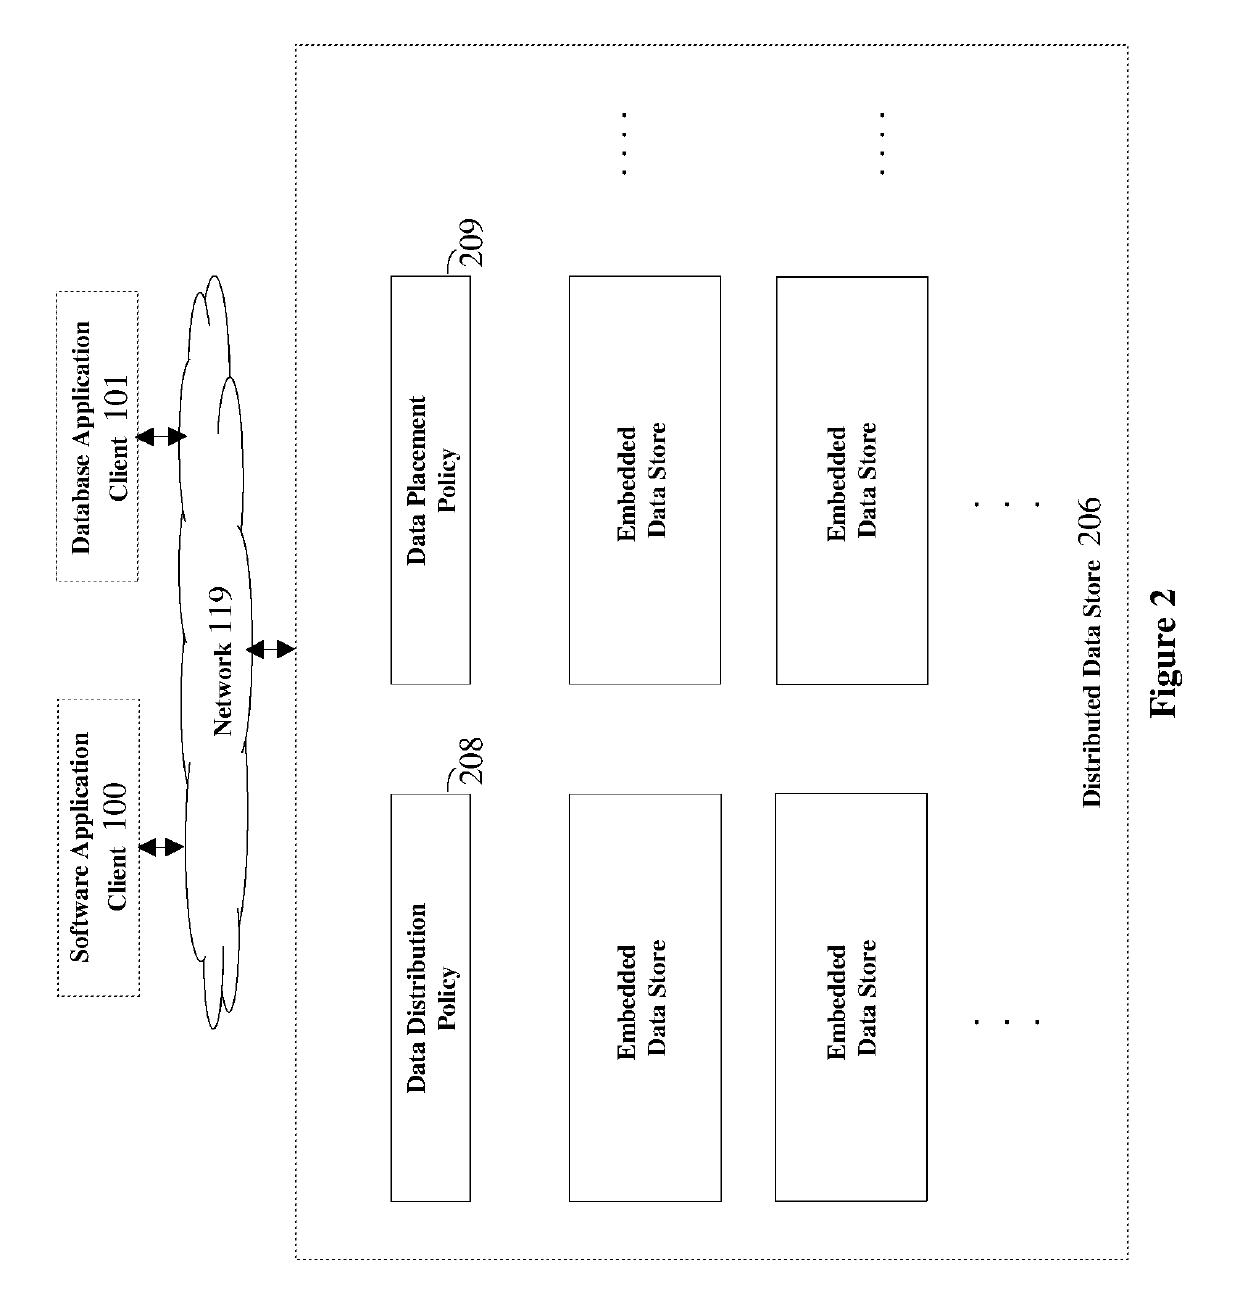 Adaptive prefix tree based order partitioned data storage system